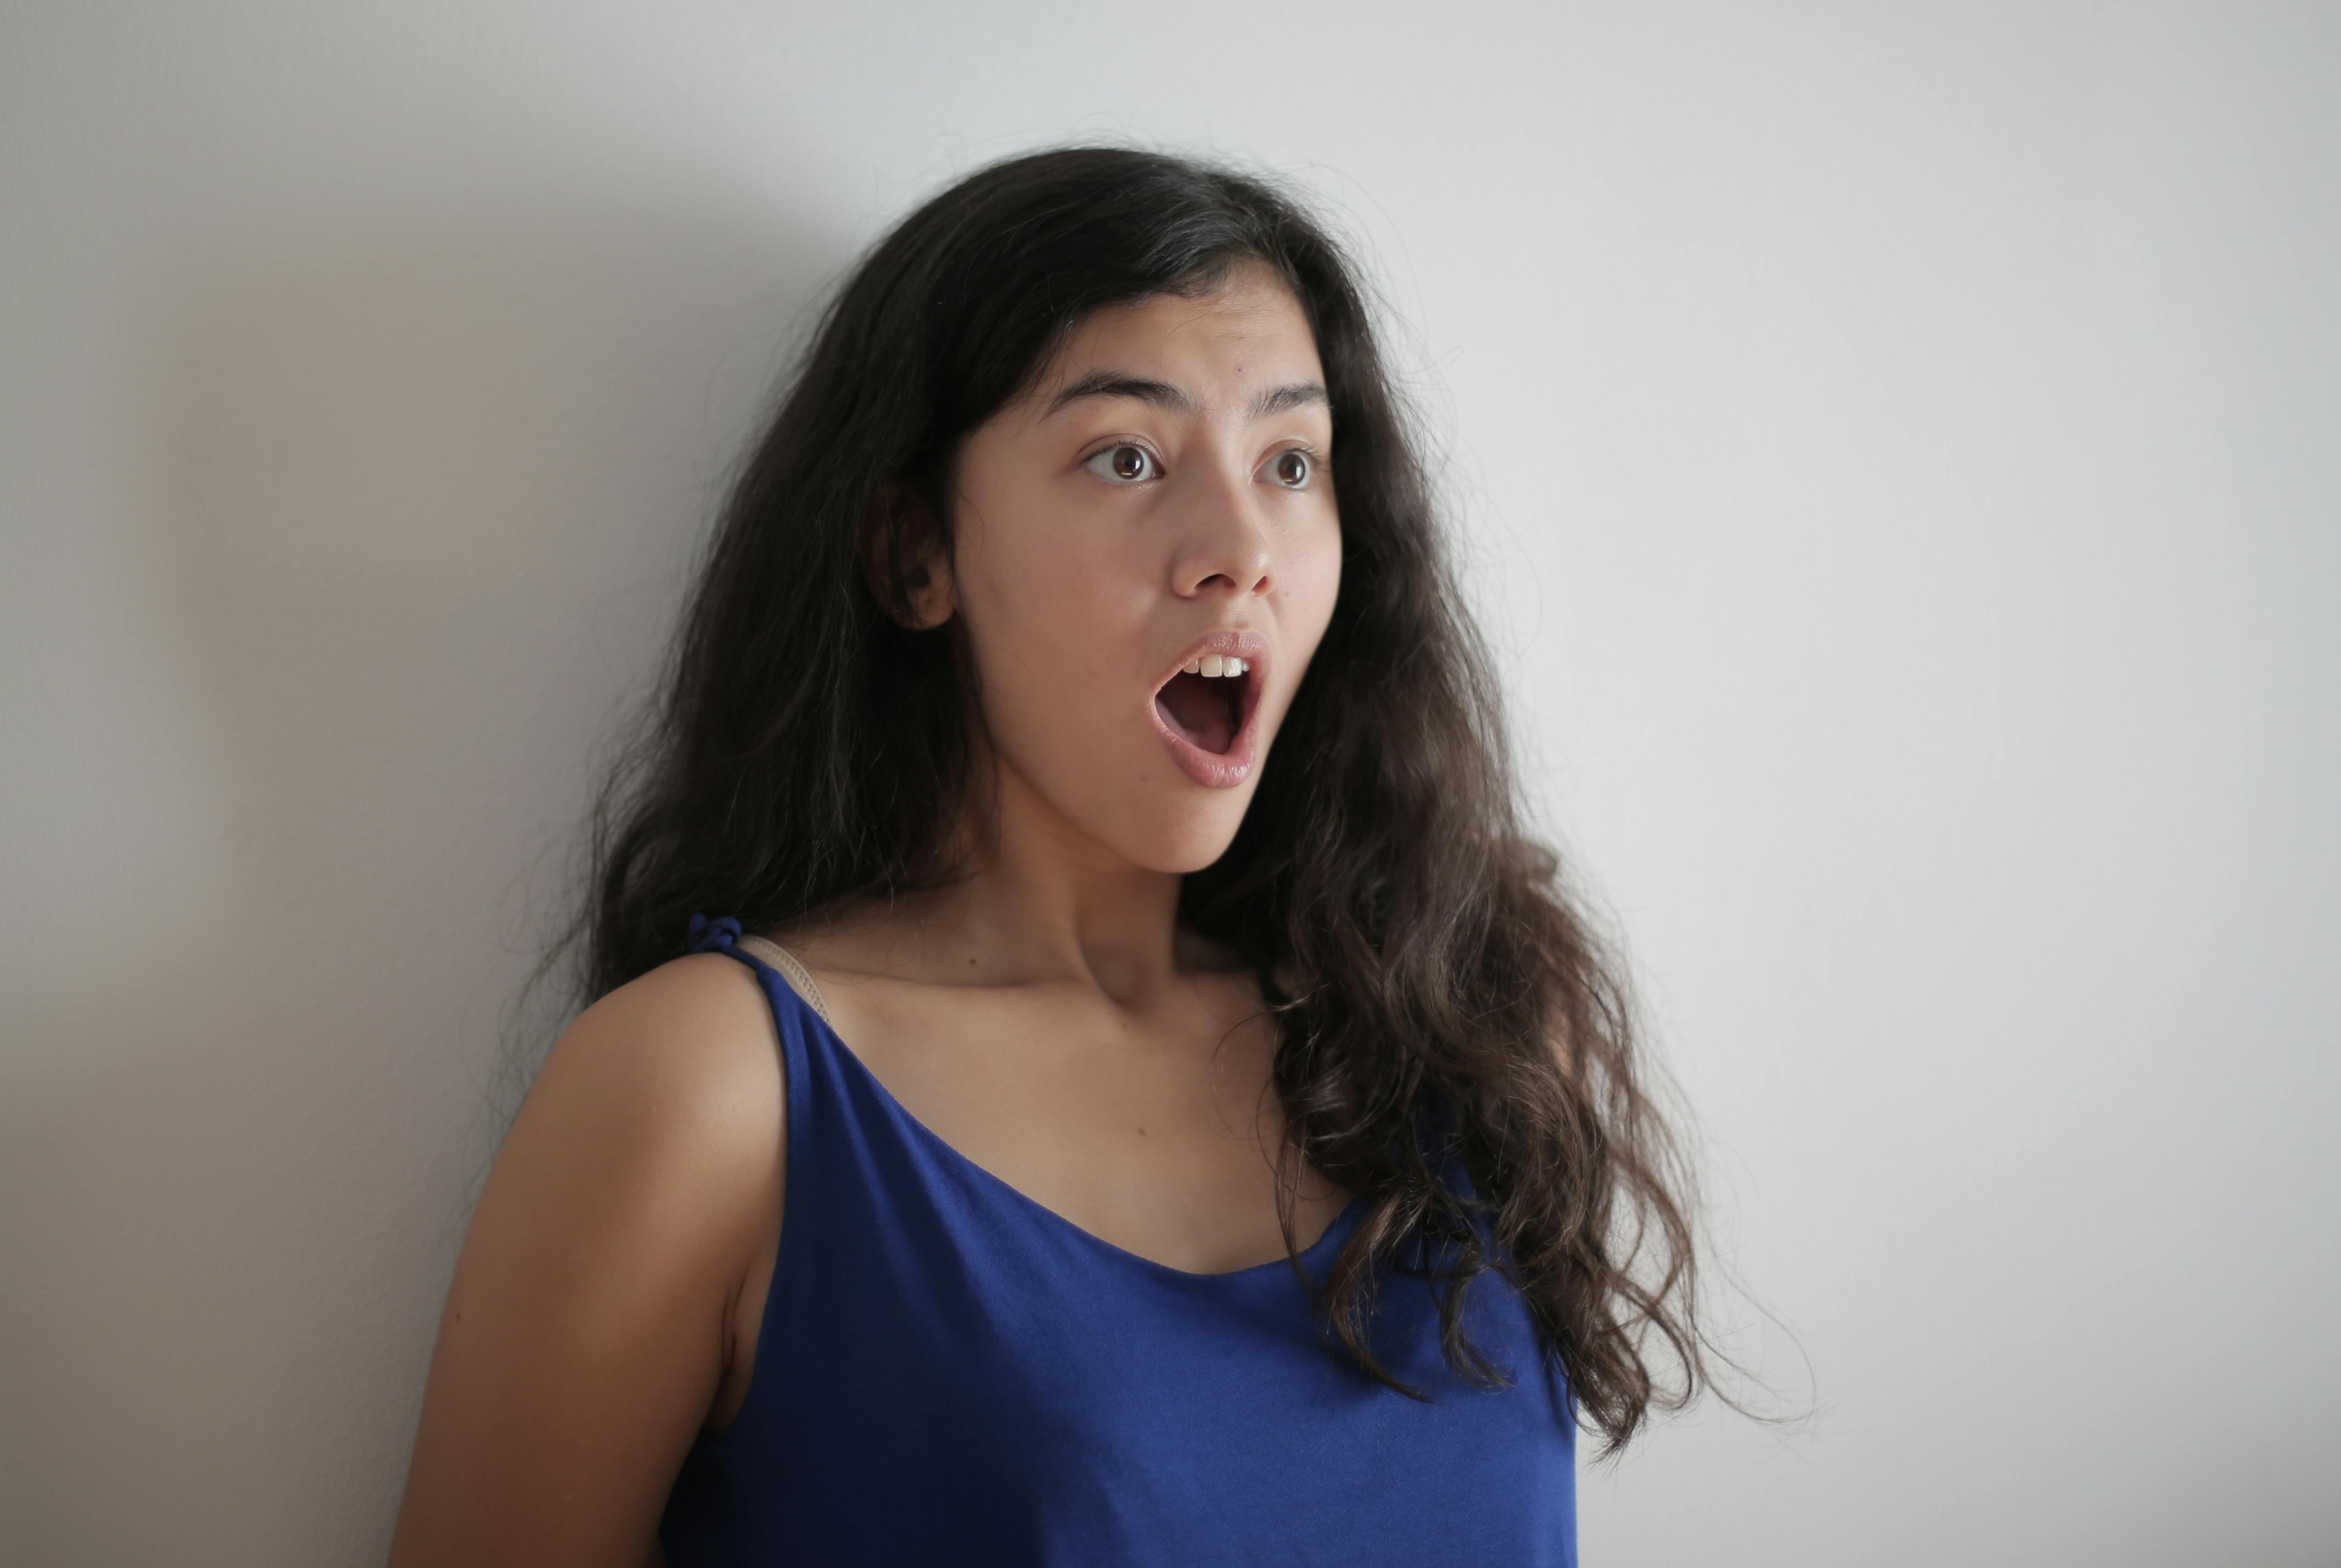 A shocked woman with her mouth open standing against a wall | Source: Pexels